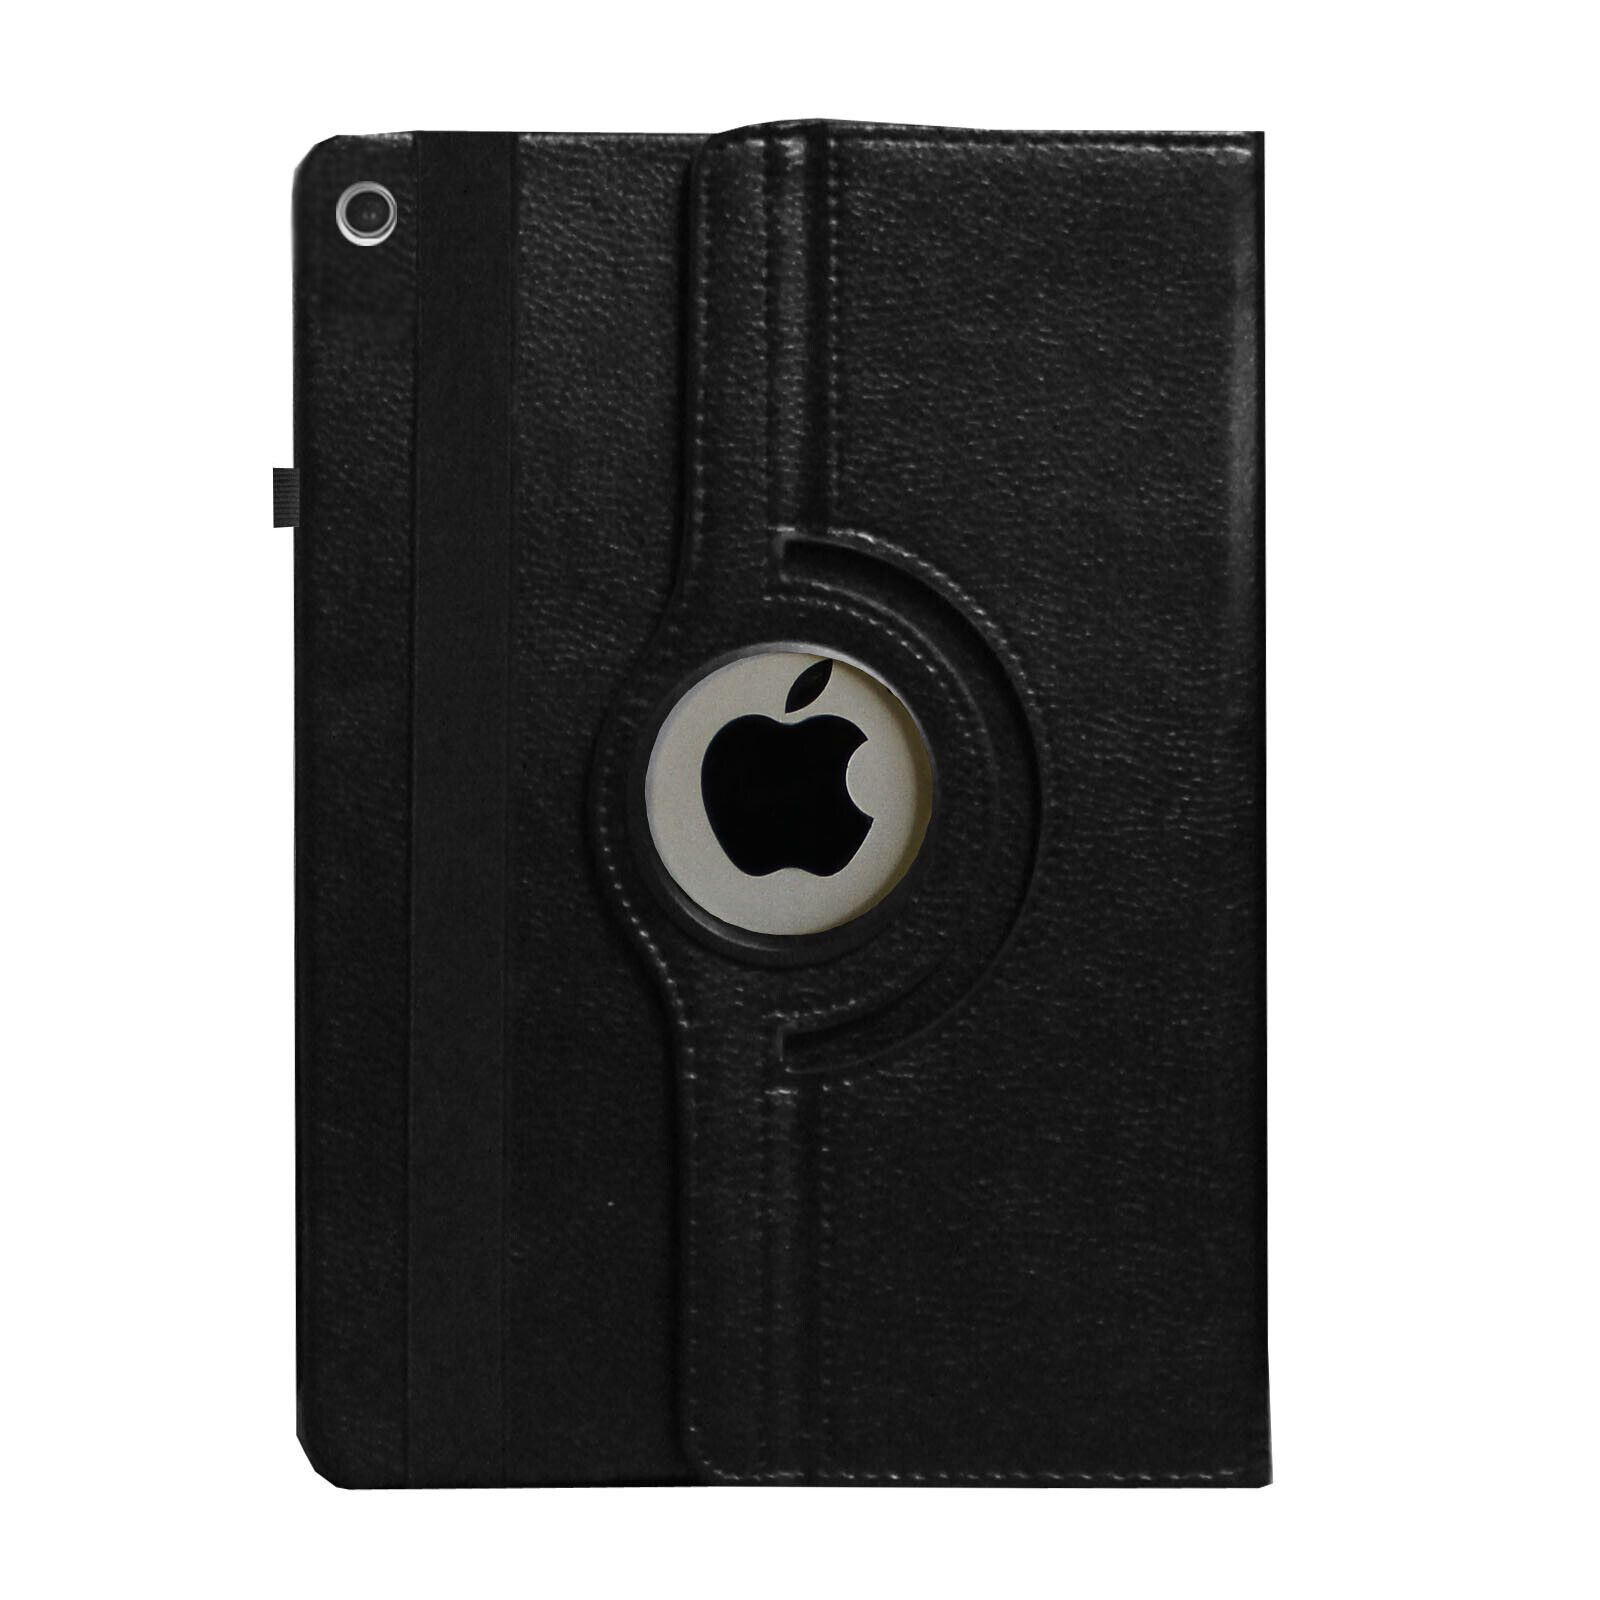 JYtrend Case for iPad Pro 10.5 2017 Smart Rotating Magnetic Cover Stand Holder